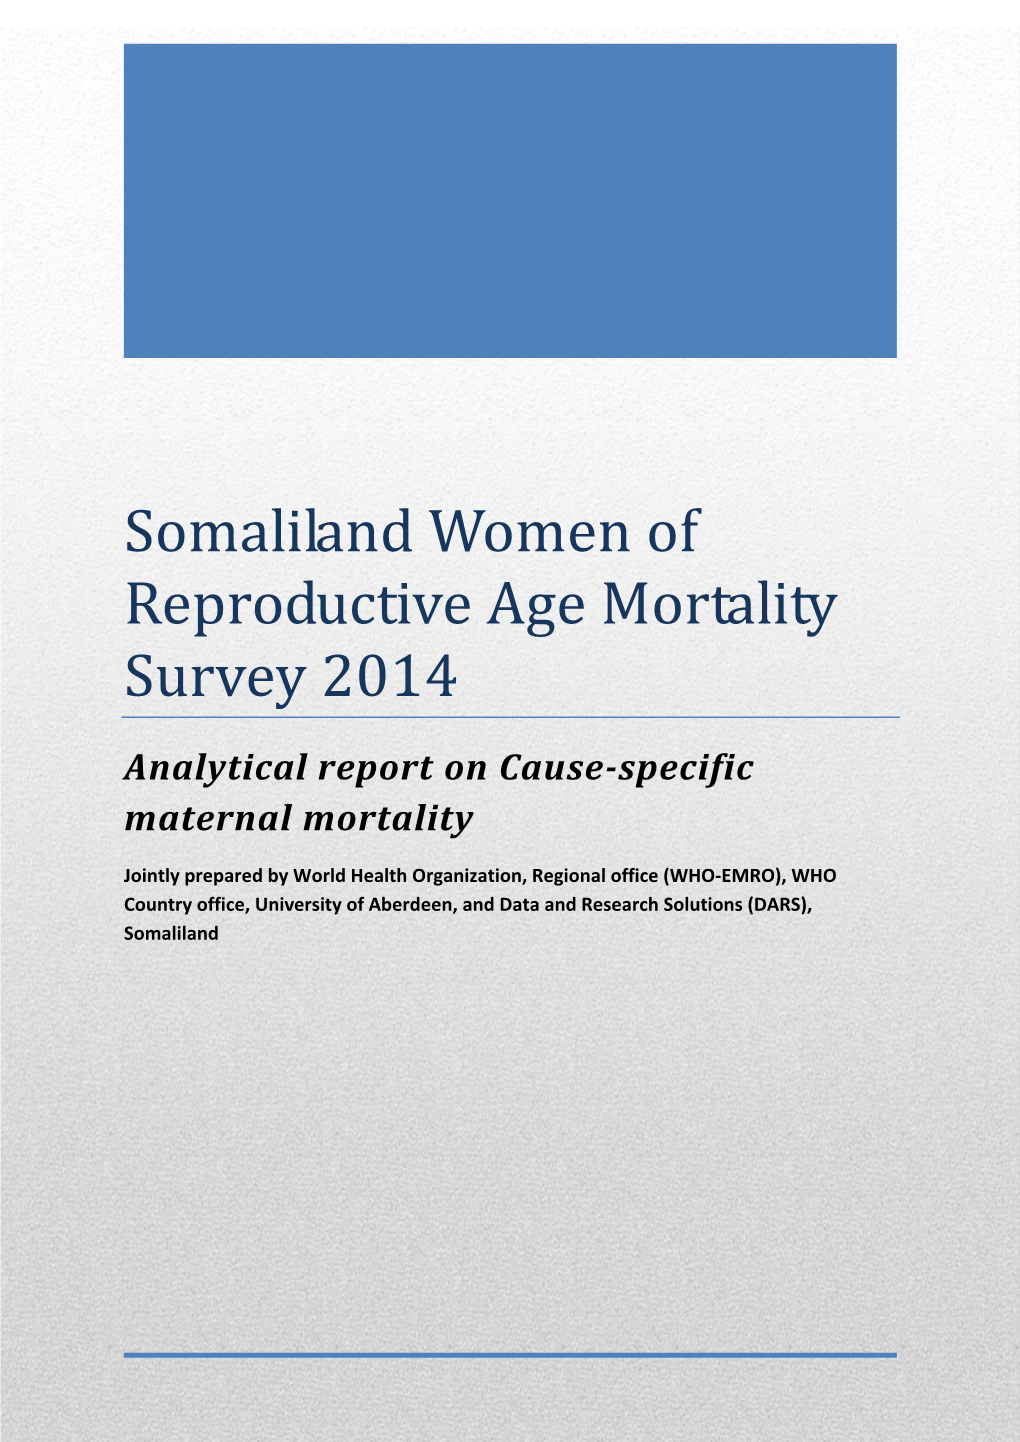 Somaliland Women of Reproductive Age Mortality Survey 2014 Analytical Report on Cause-Specific Maternal Mortality